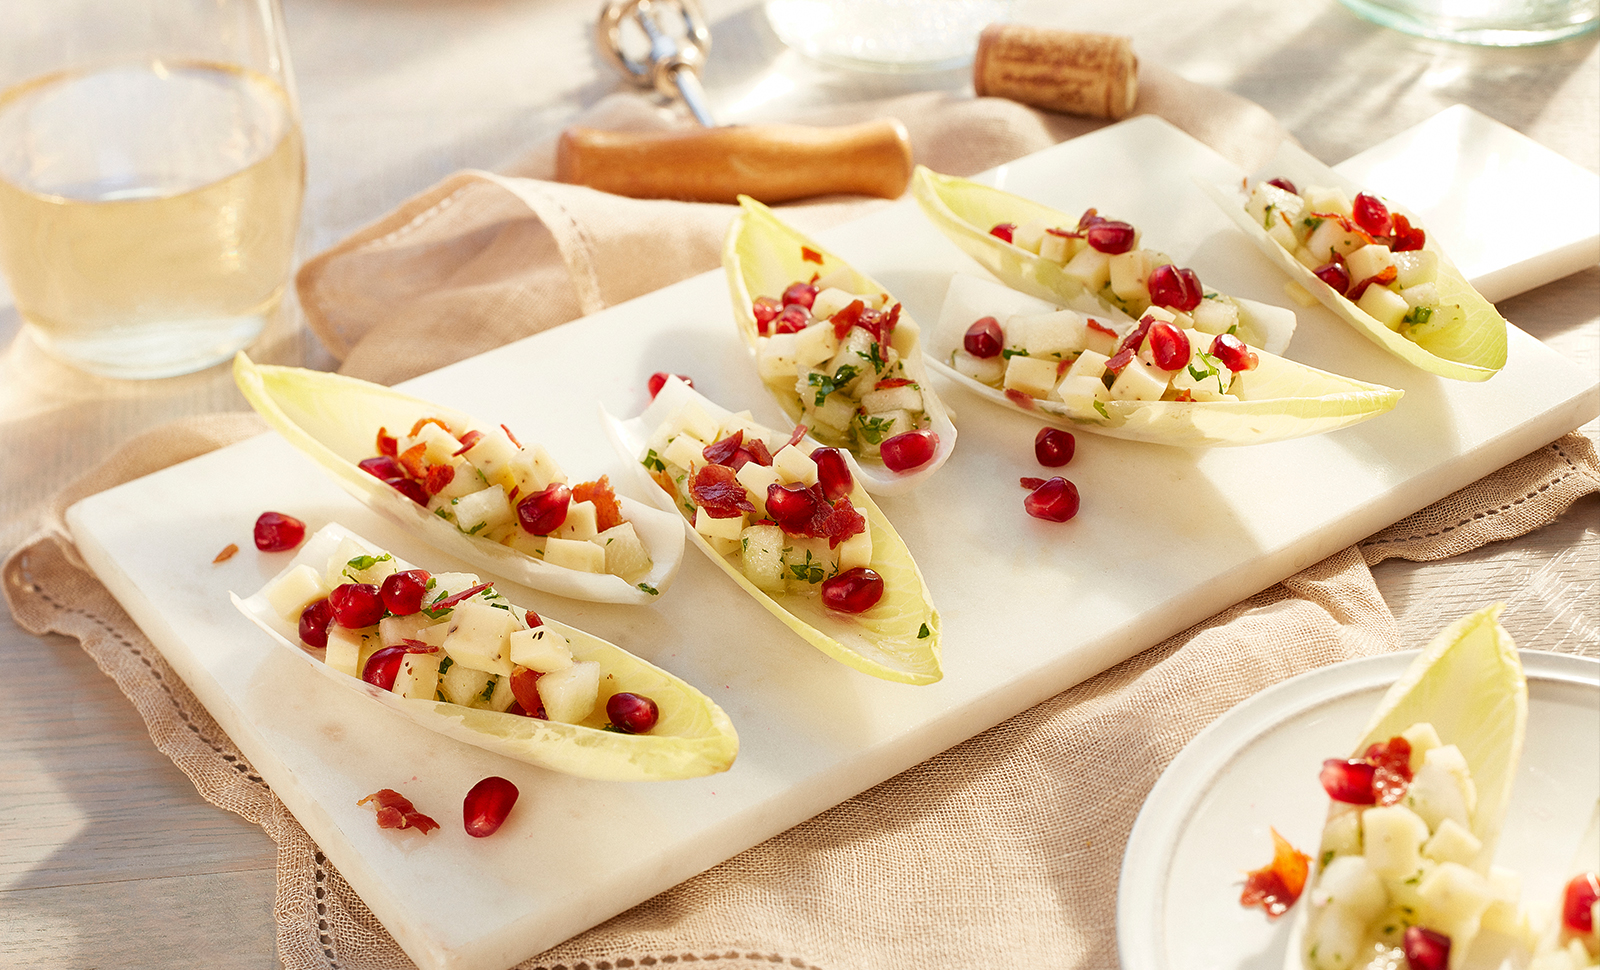 Seven pieces of endive leaves pear salad on a white plate served with a glass of white wine.